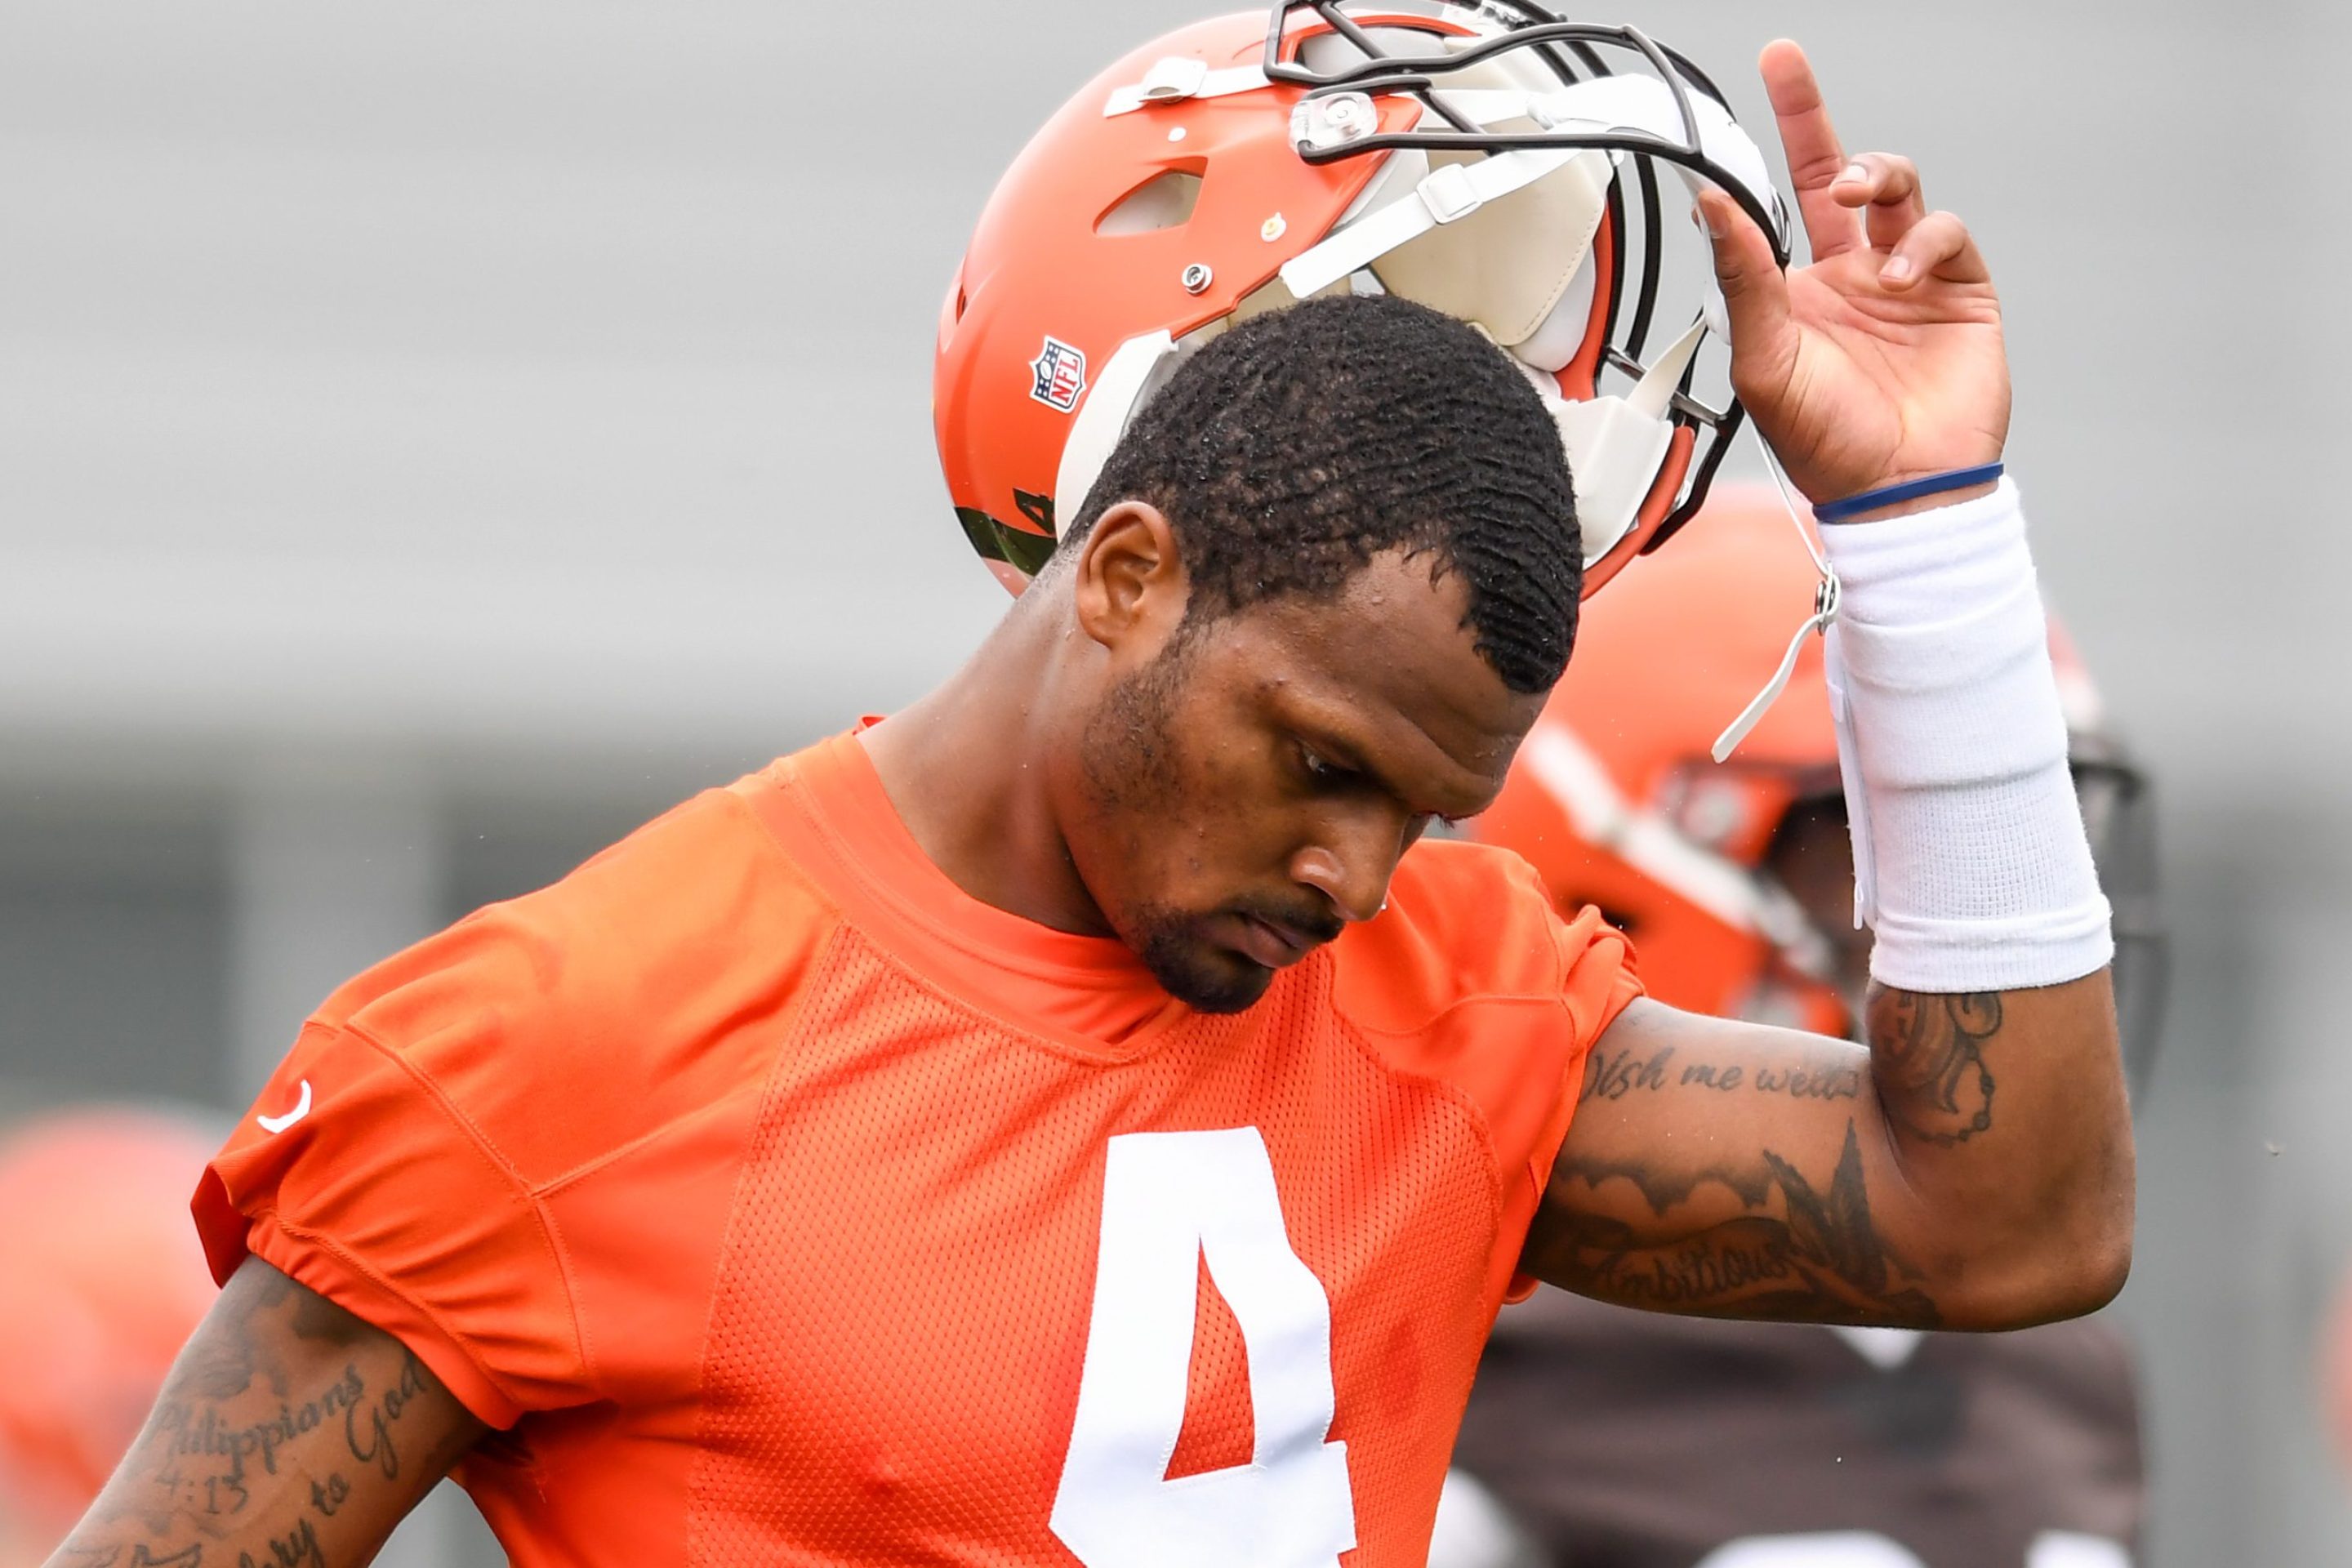 Deshaun Watson #4 of the Cleveland Browns takes off his helmet as he warms up during the Cleveland Browns mandatory minicamp at CrossCountry Mortgage Campus on June 14, 2022 in Berea, Ohio.